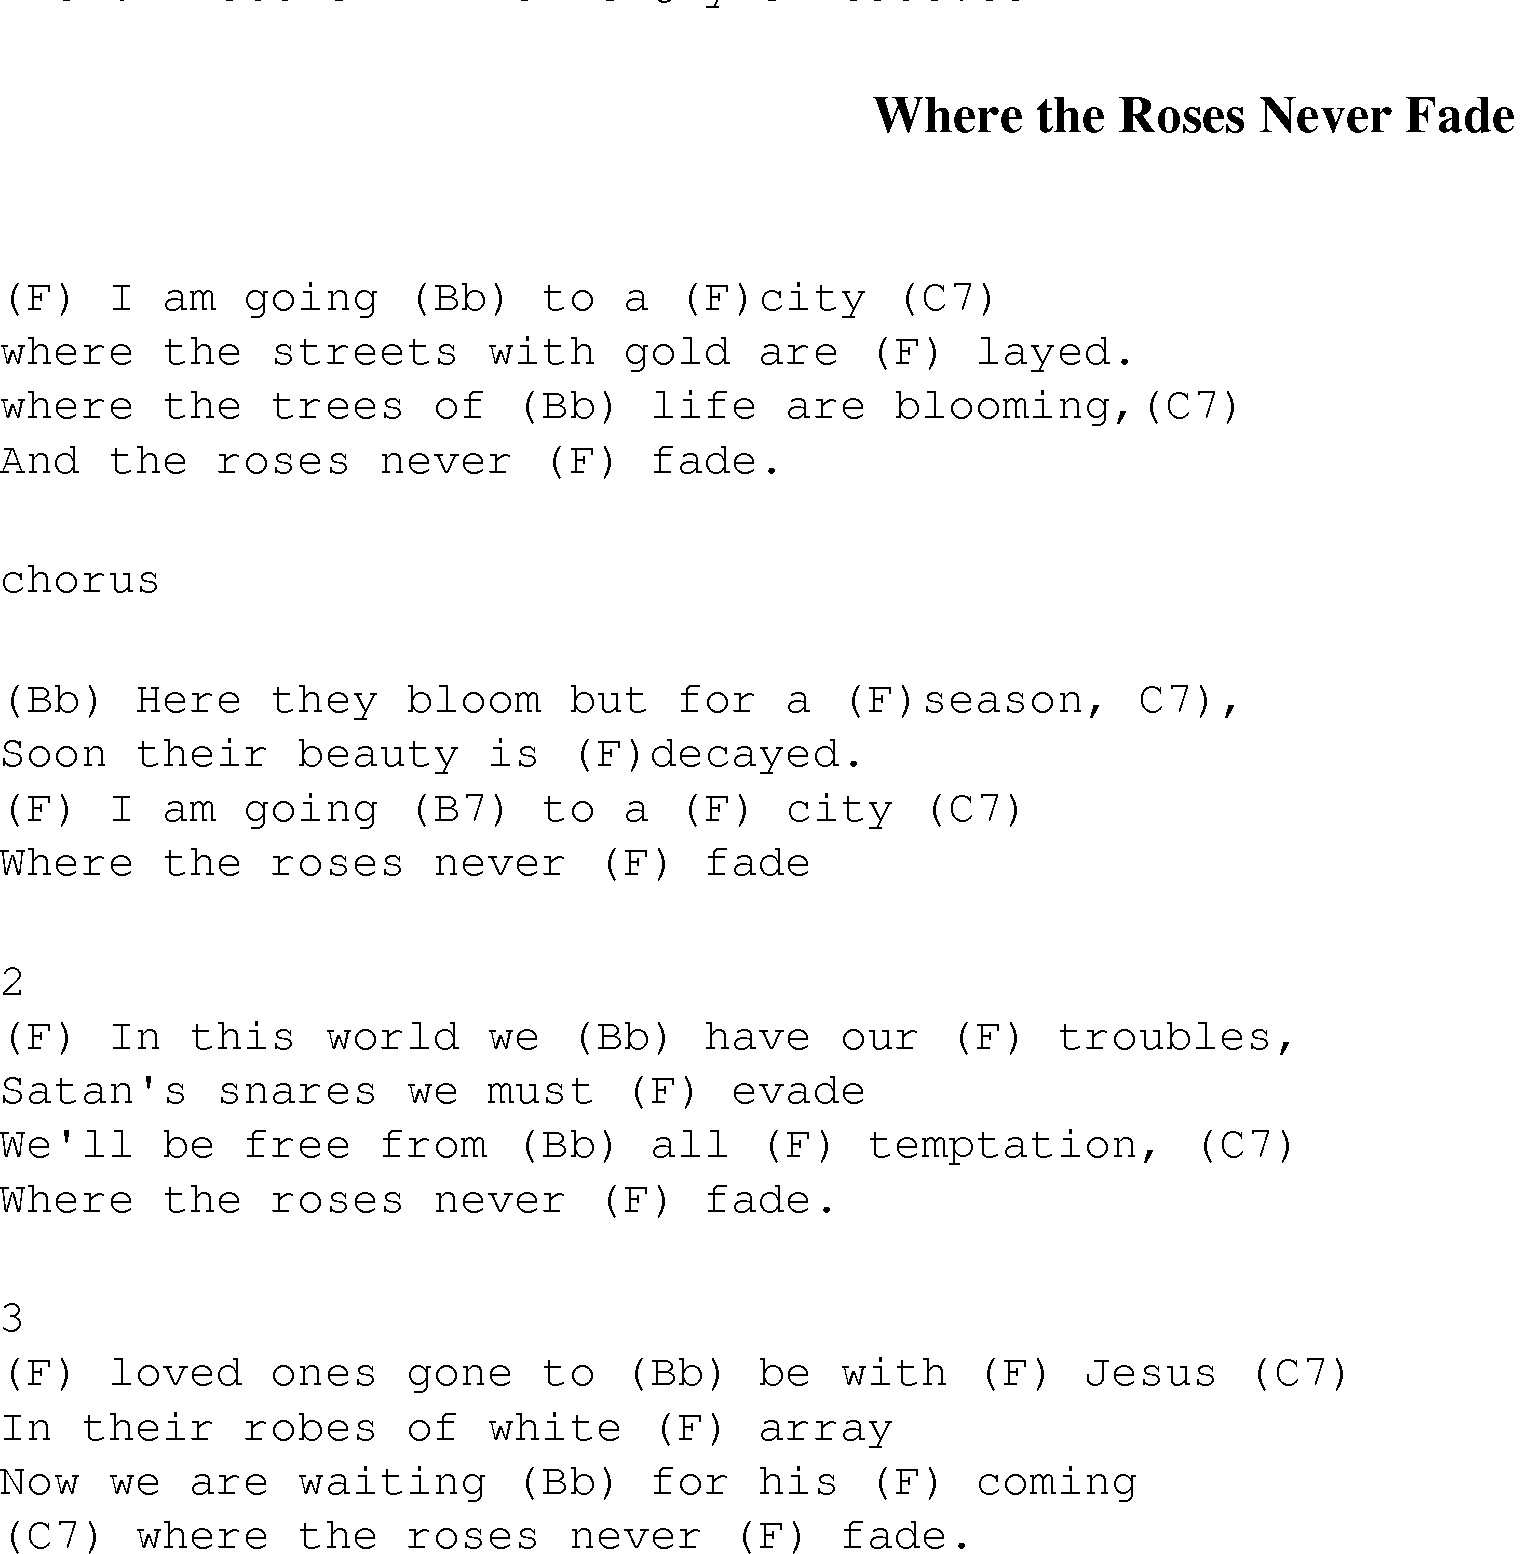 Gospel Song: where_the_roses_never_fade, lyrics and chords.